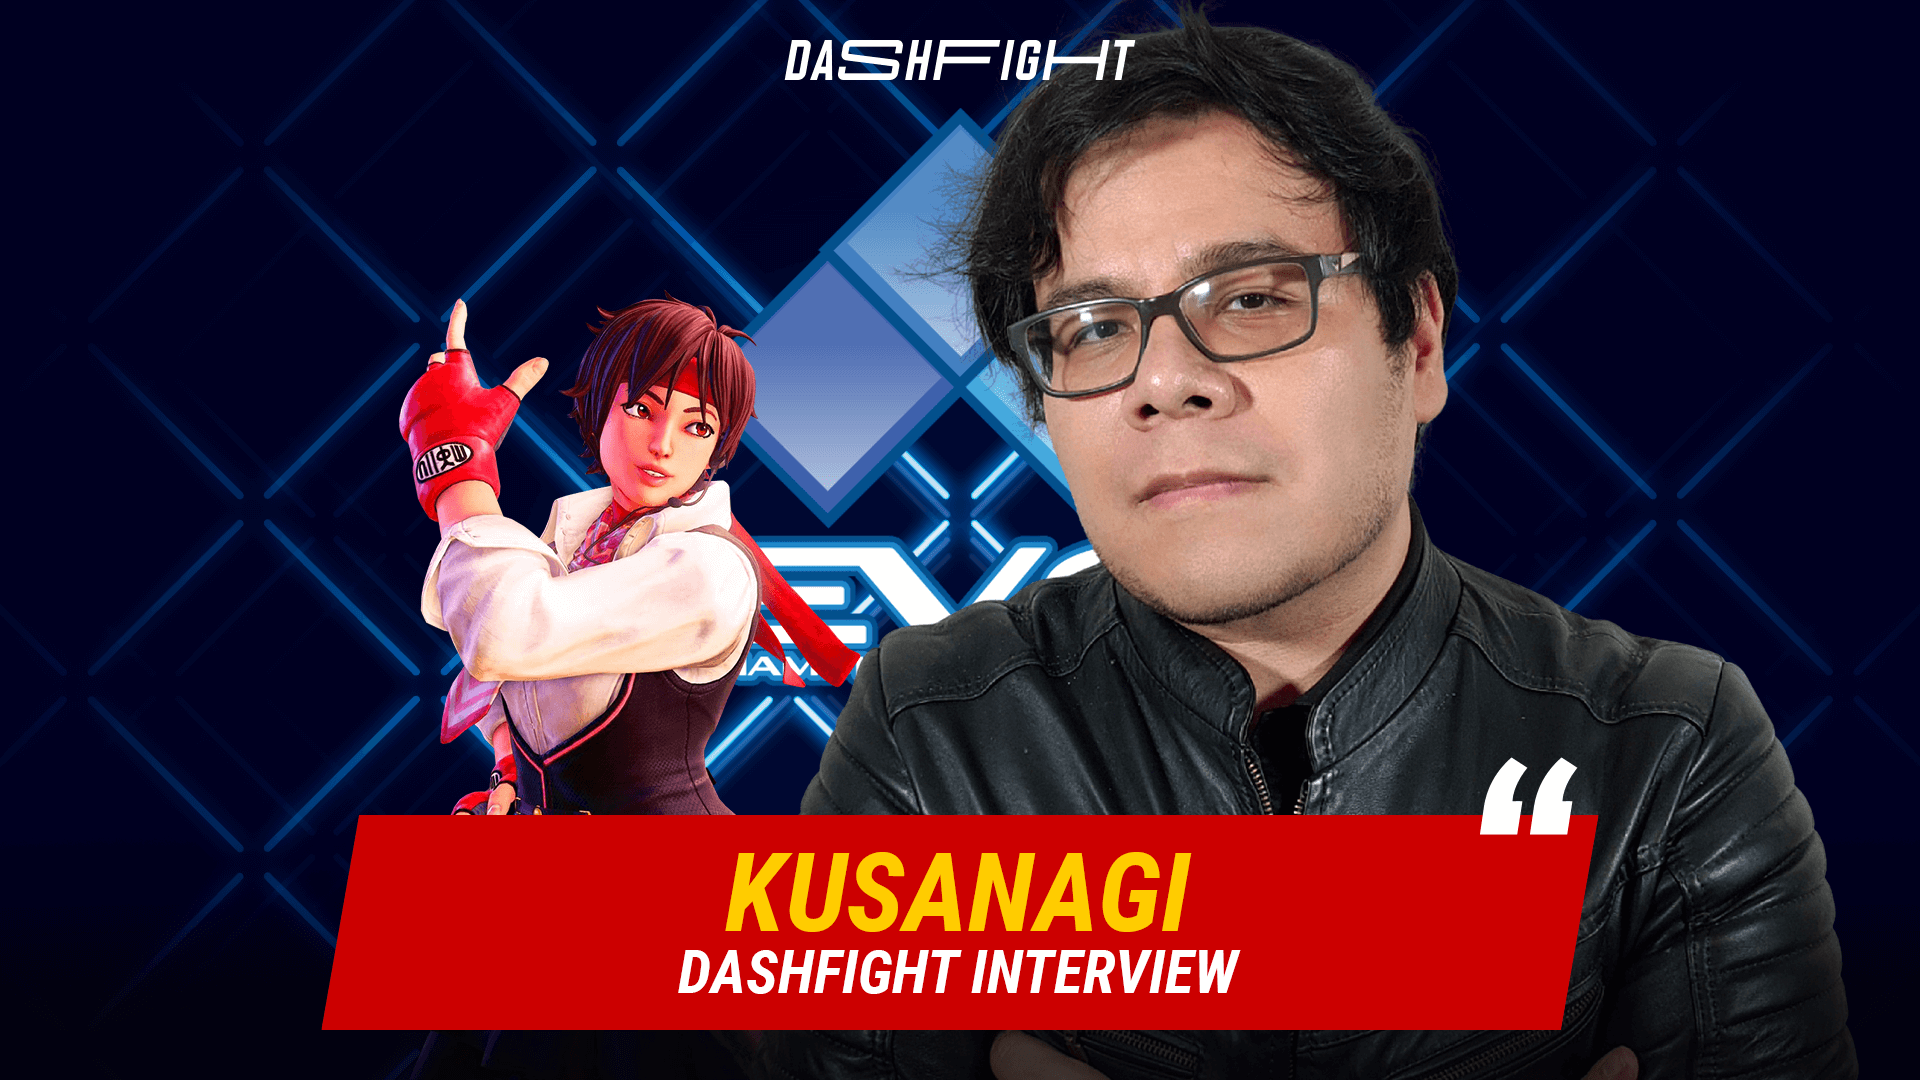 Kusanagi: “I’m more of a masochist when it comes to main characters”